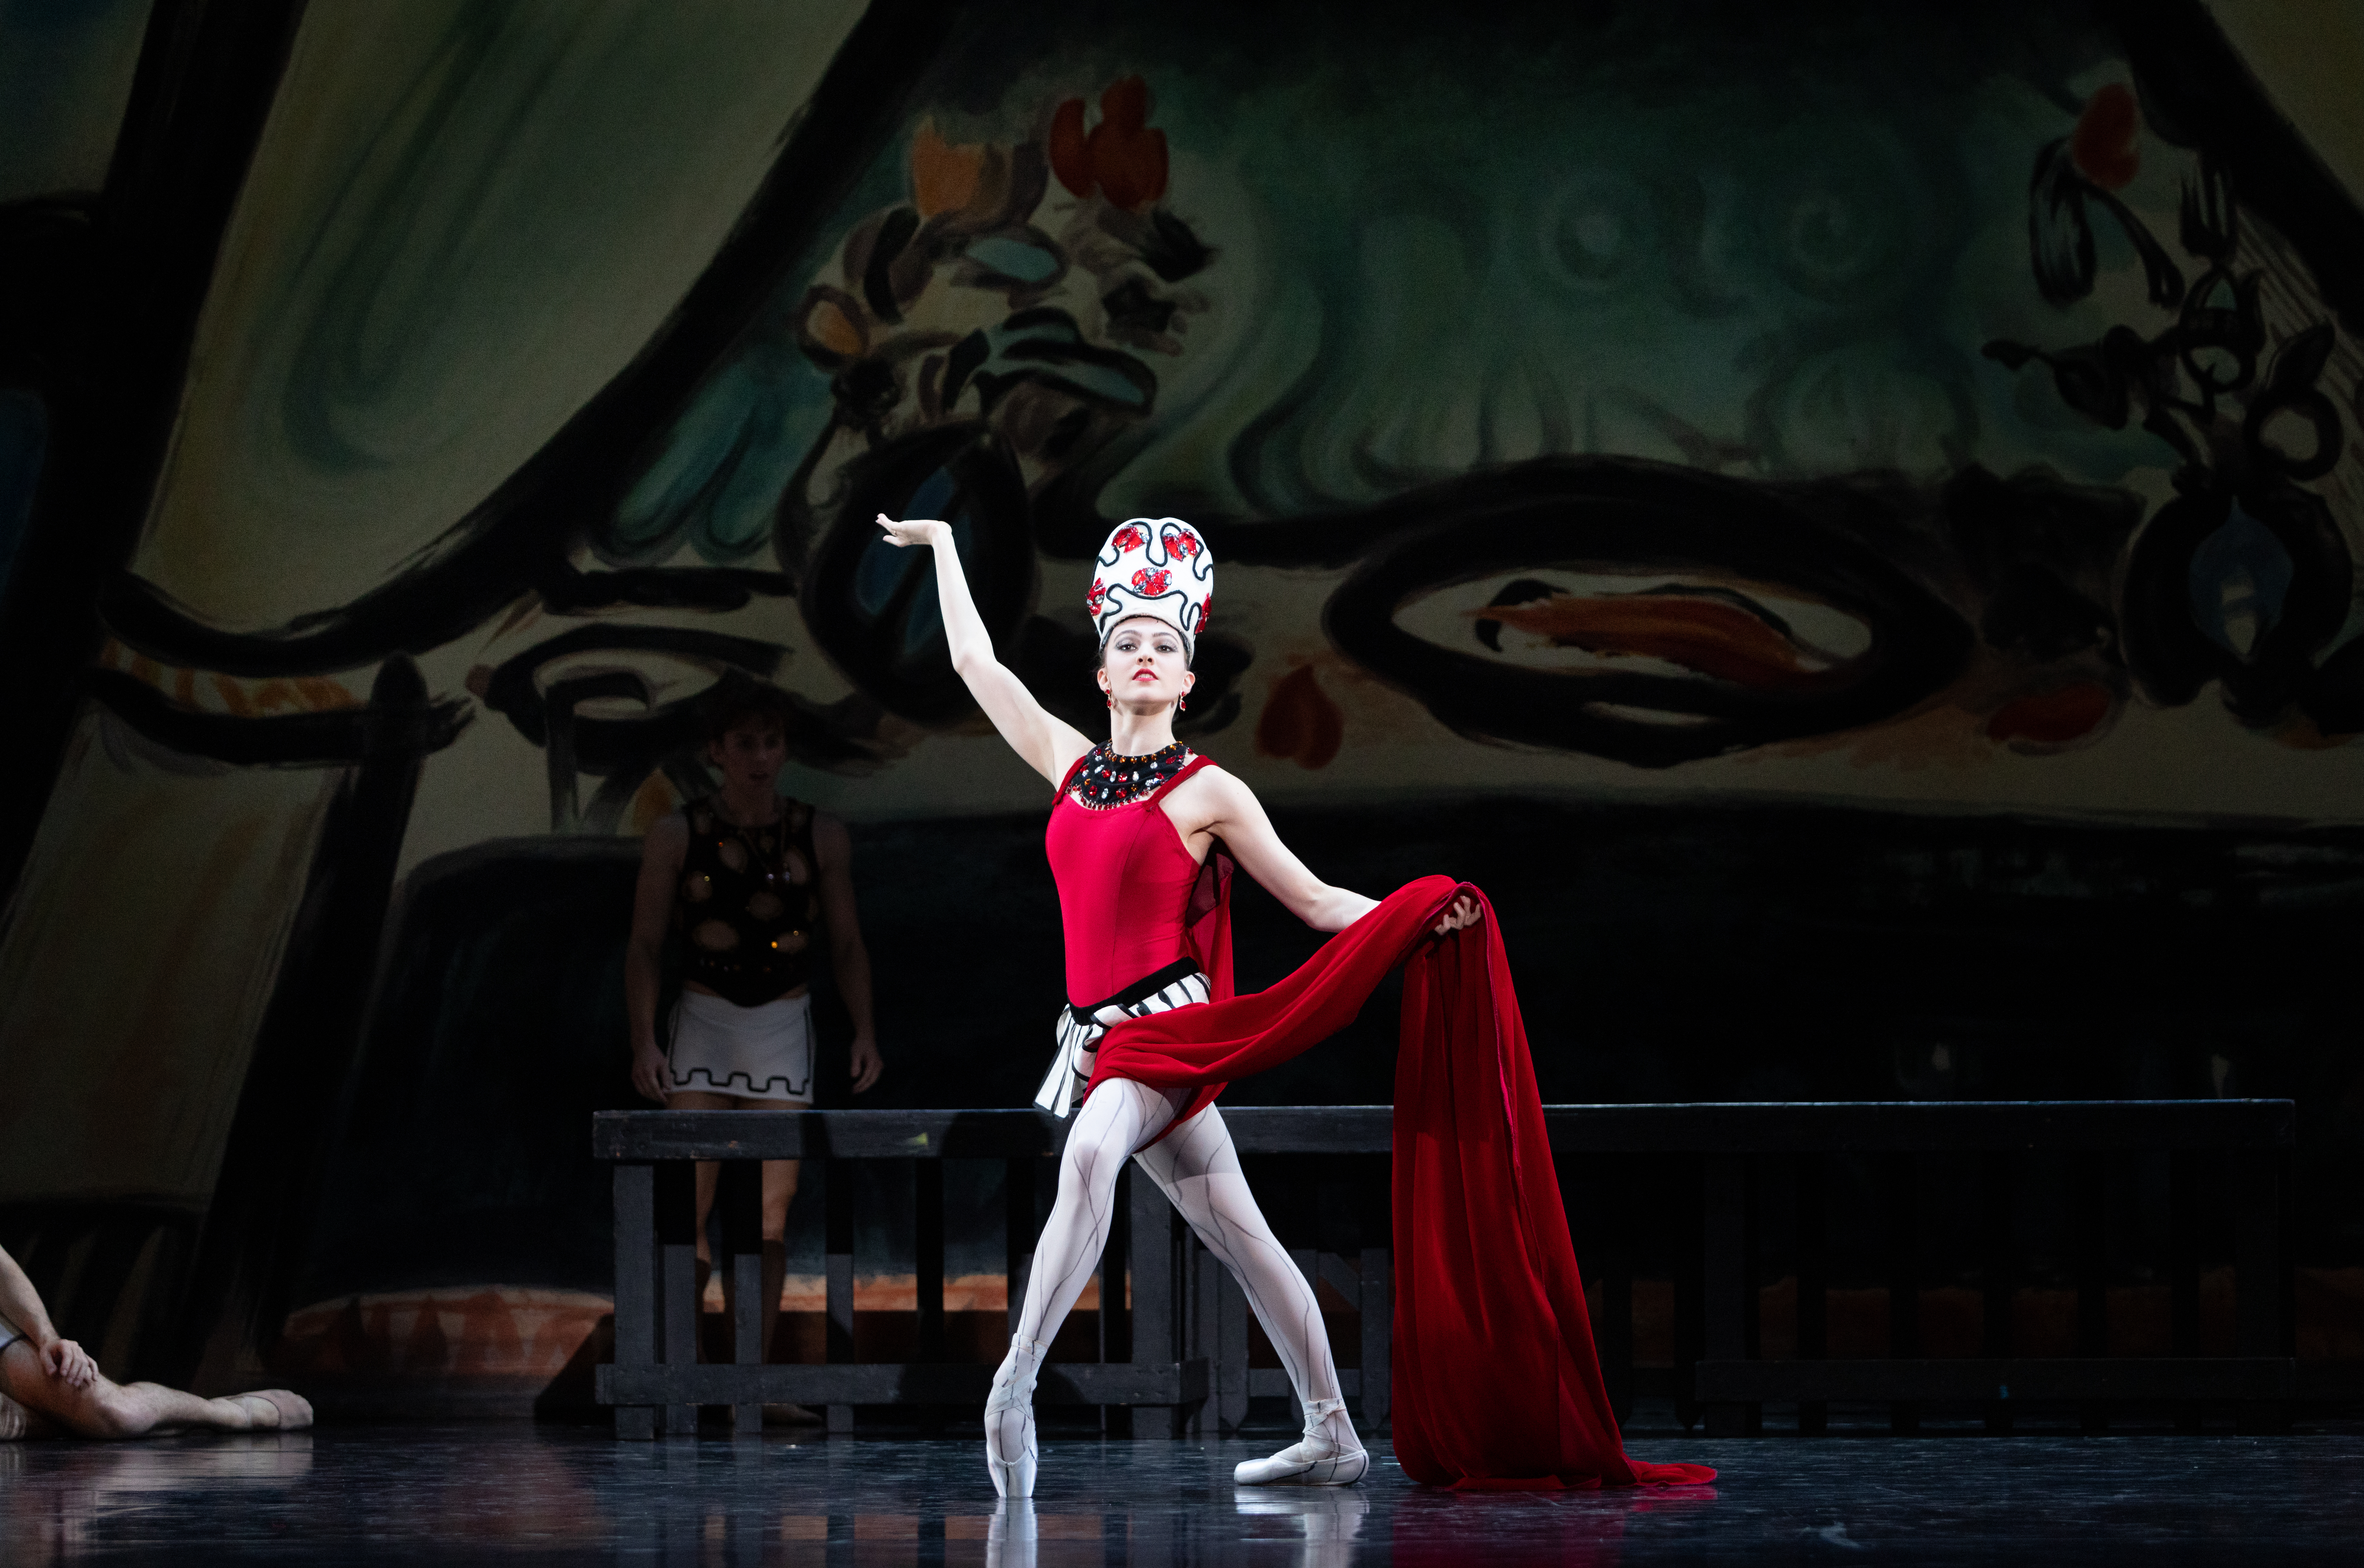 Sydney Dolan onstage as the Siren in Balanchine's Prodigal Son. She poses center stage in a fourth position lunge, front foot in forced arch on pointe. Her left hand holds the long red train of her costume at waist height; her right hand is raised to the side, palm up.